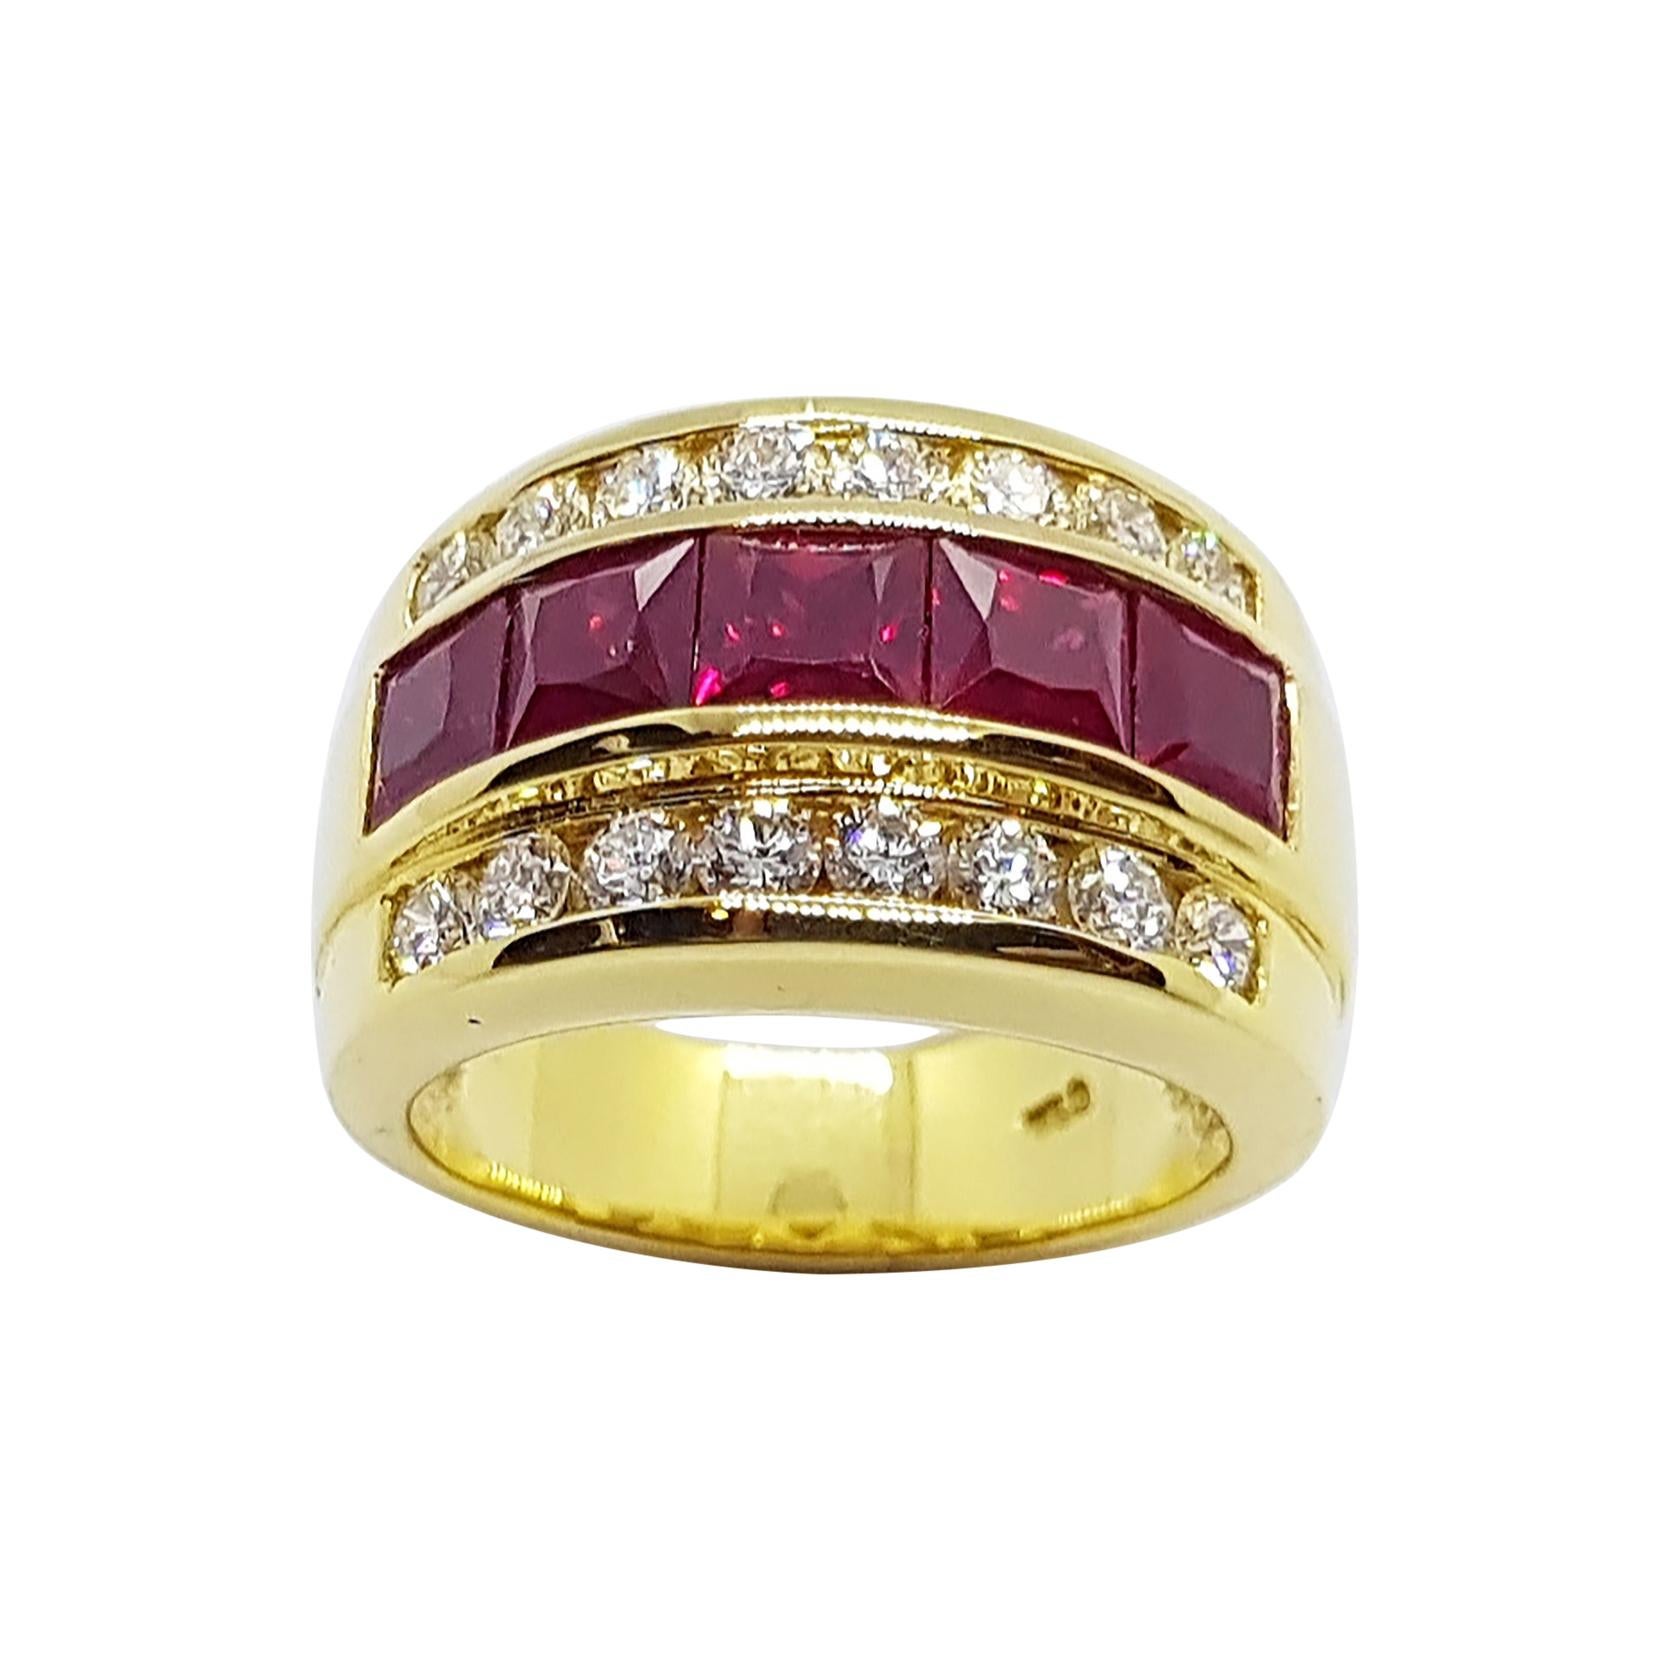 Ruby 2.48 Carats with Diamond 0.82 Carat Ring Set in 18 Karat Gold Settings For Sale